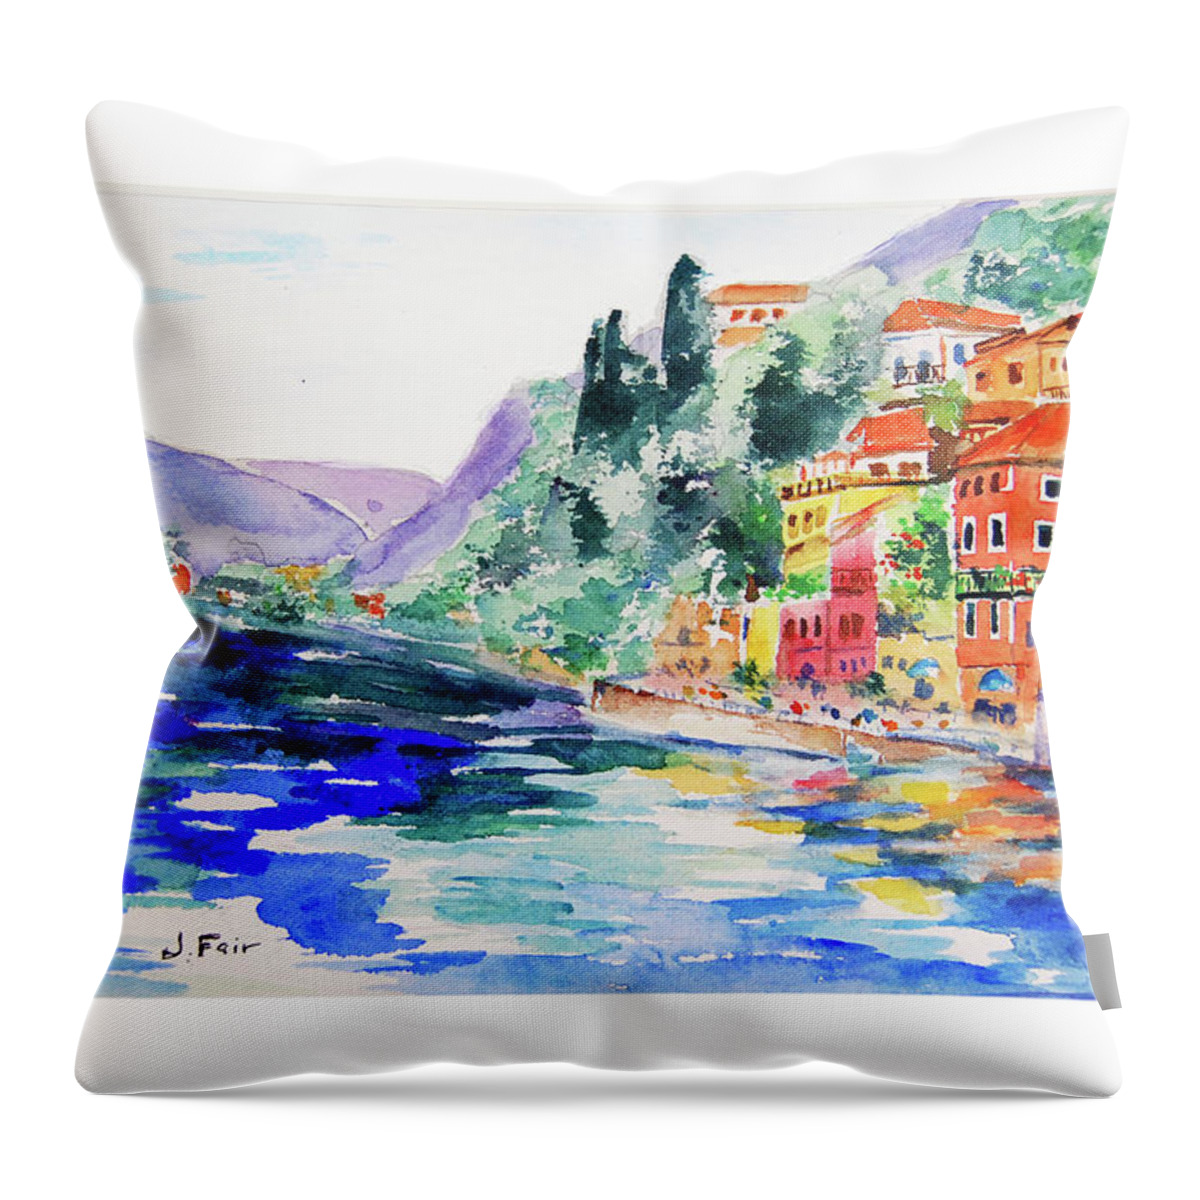 Lake Como Throw Pillow featuring the painting Varenna on Lake Como by Jerry Fair